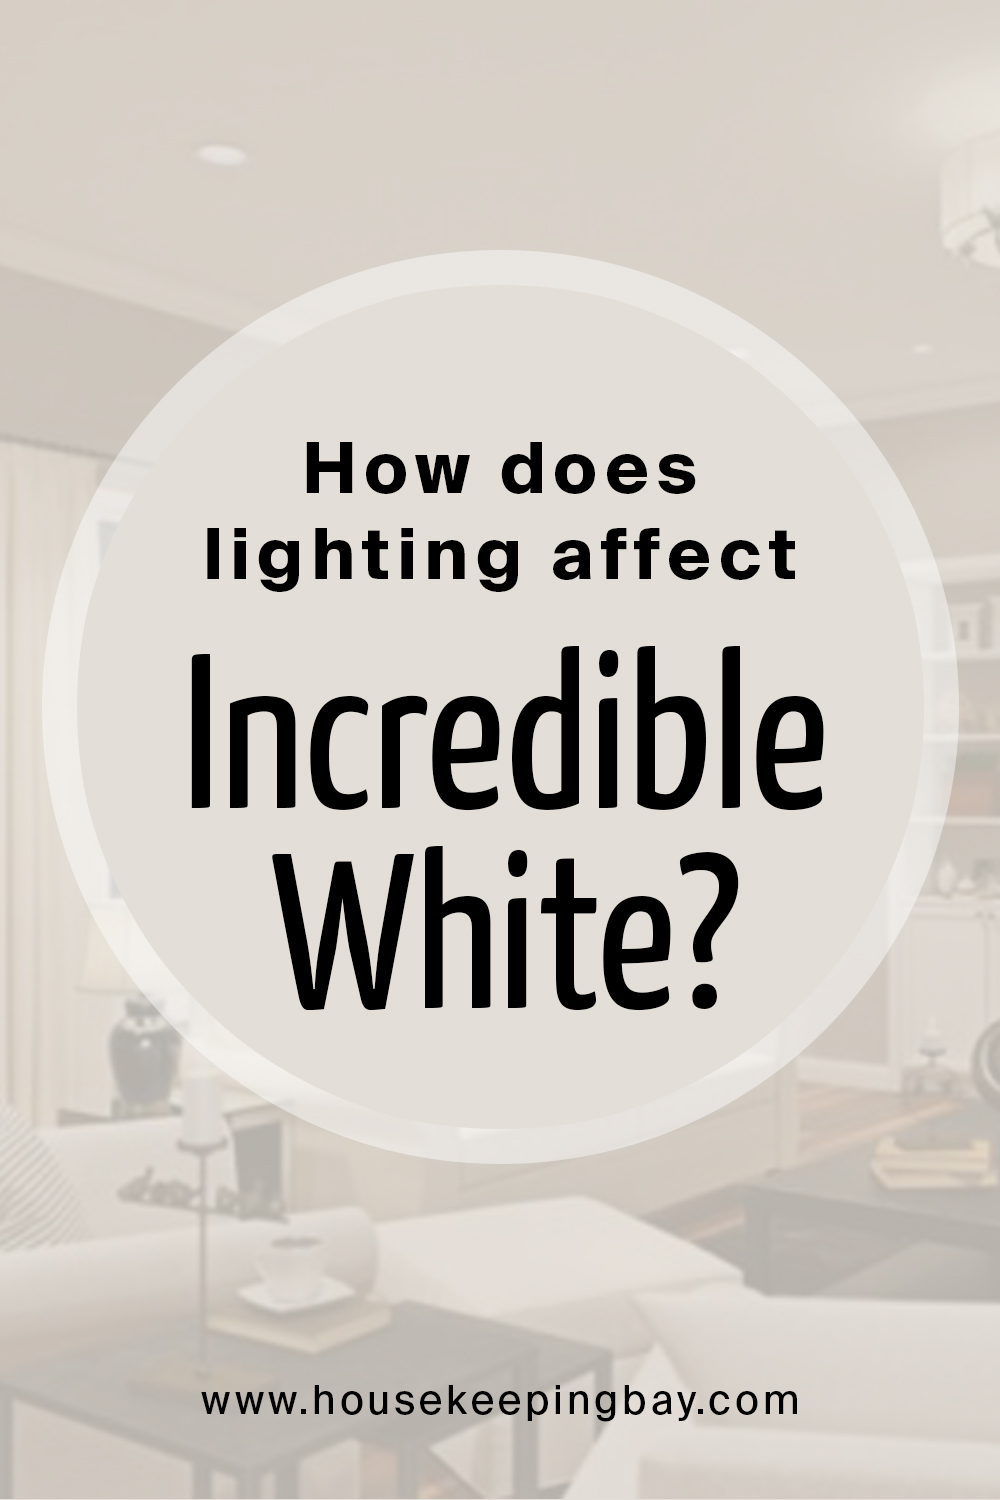 How does lighting affect Incredible White